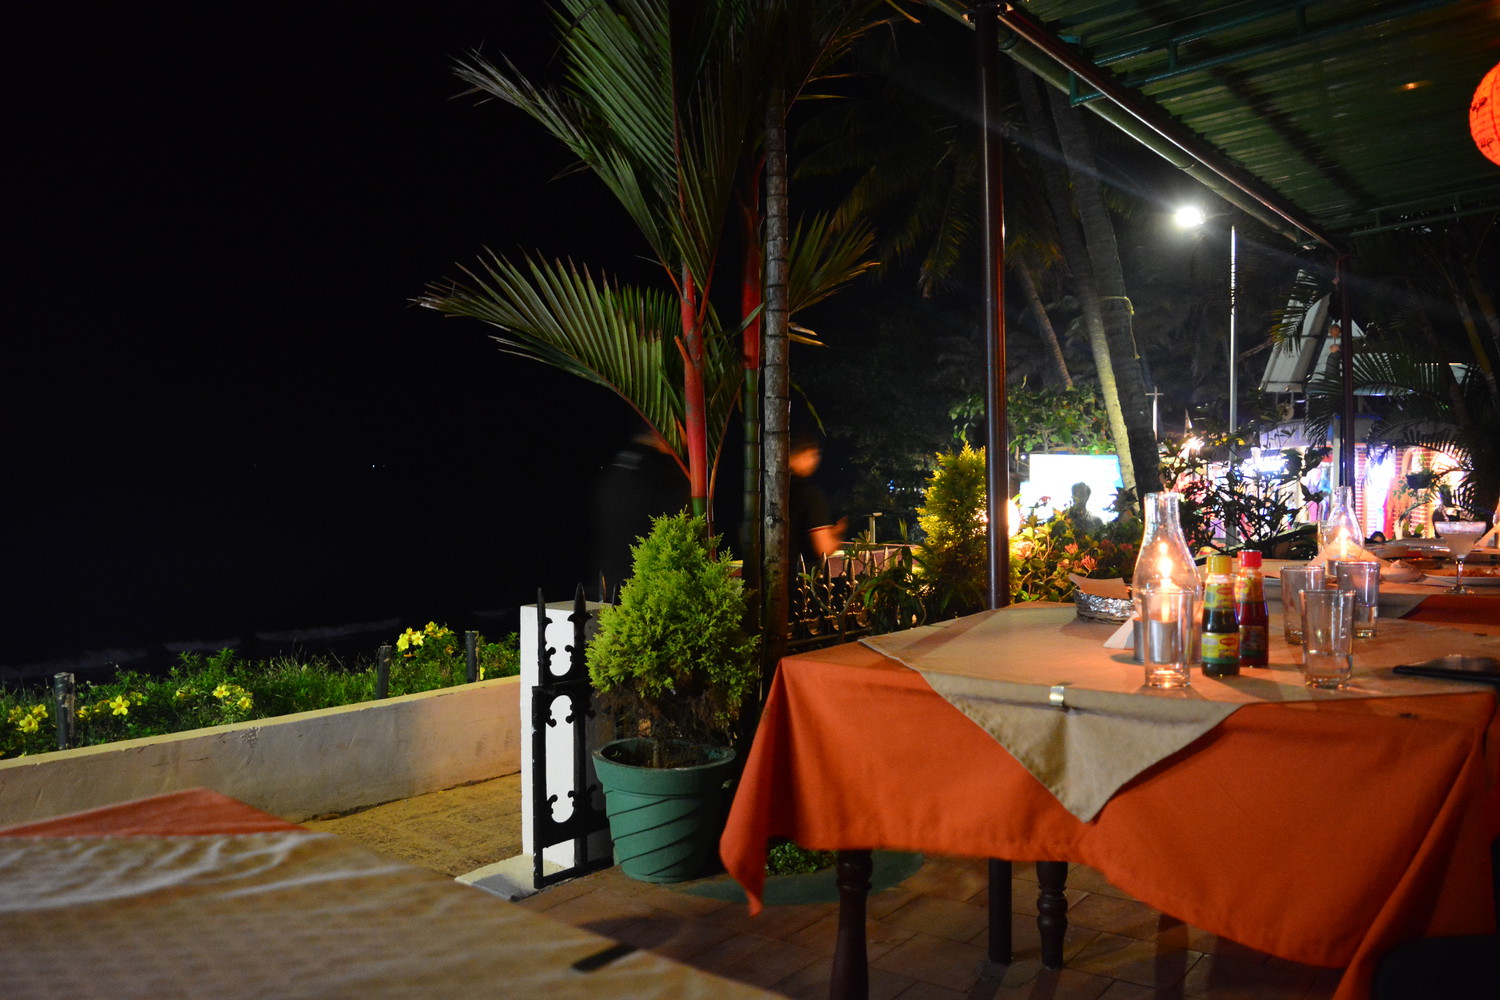 A restaurant with candlelit tables beside a promenade in the evening